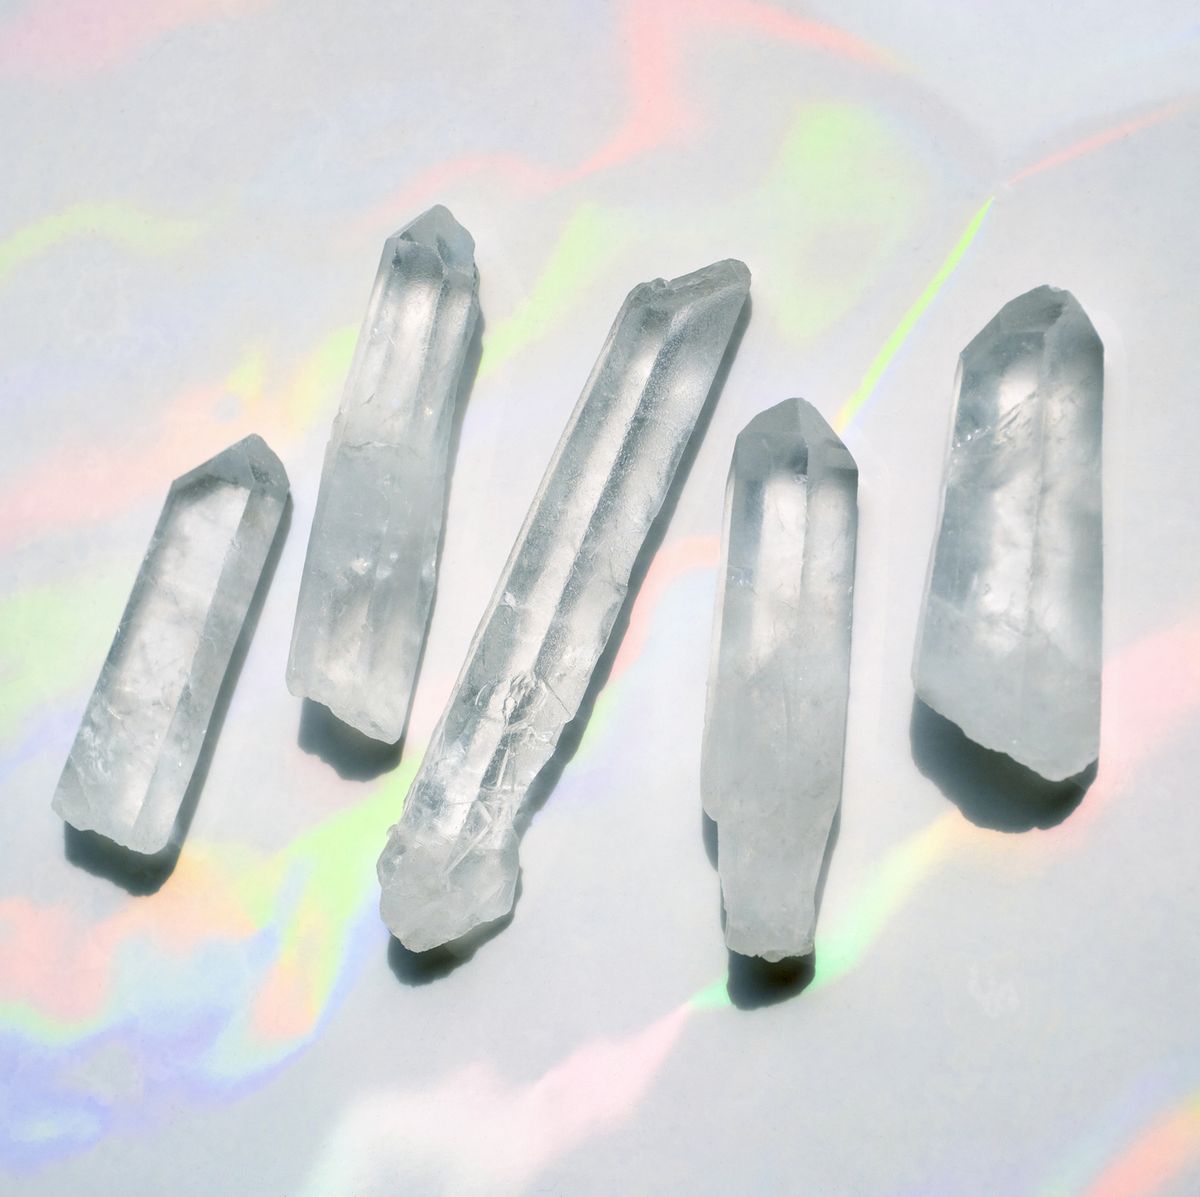 Crystal Healing and Chakra Treatments a history and overview